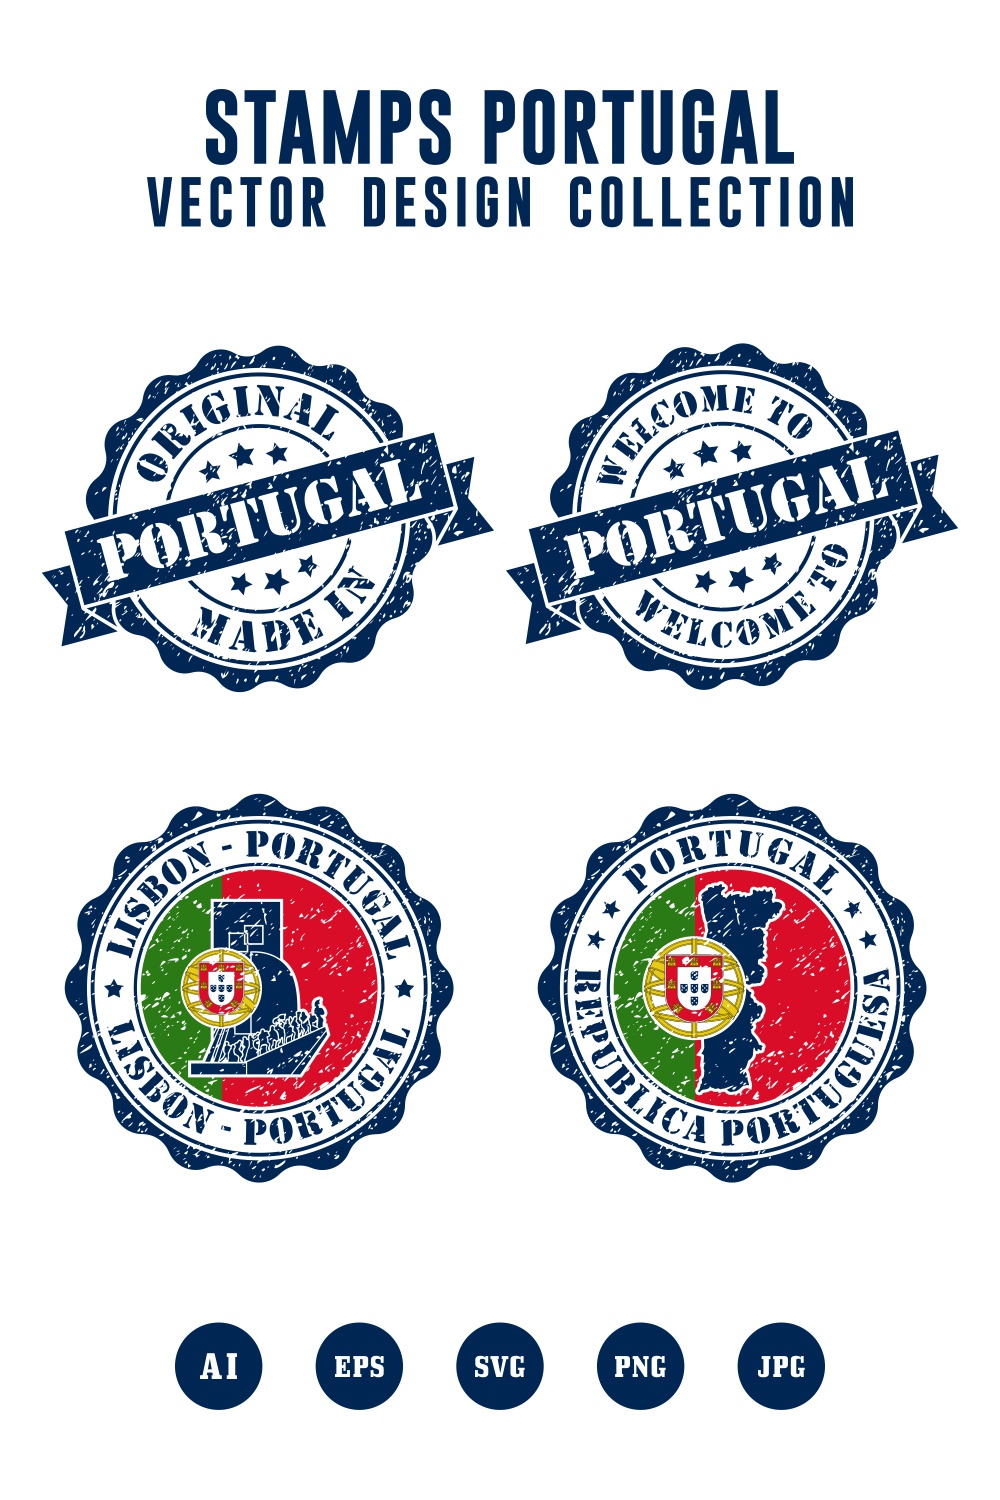 Welcome to lisbon portugal vector stamps logo collection - $4 pinterest preview image.